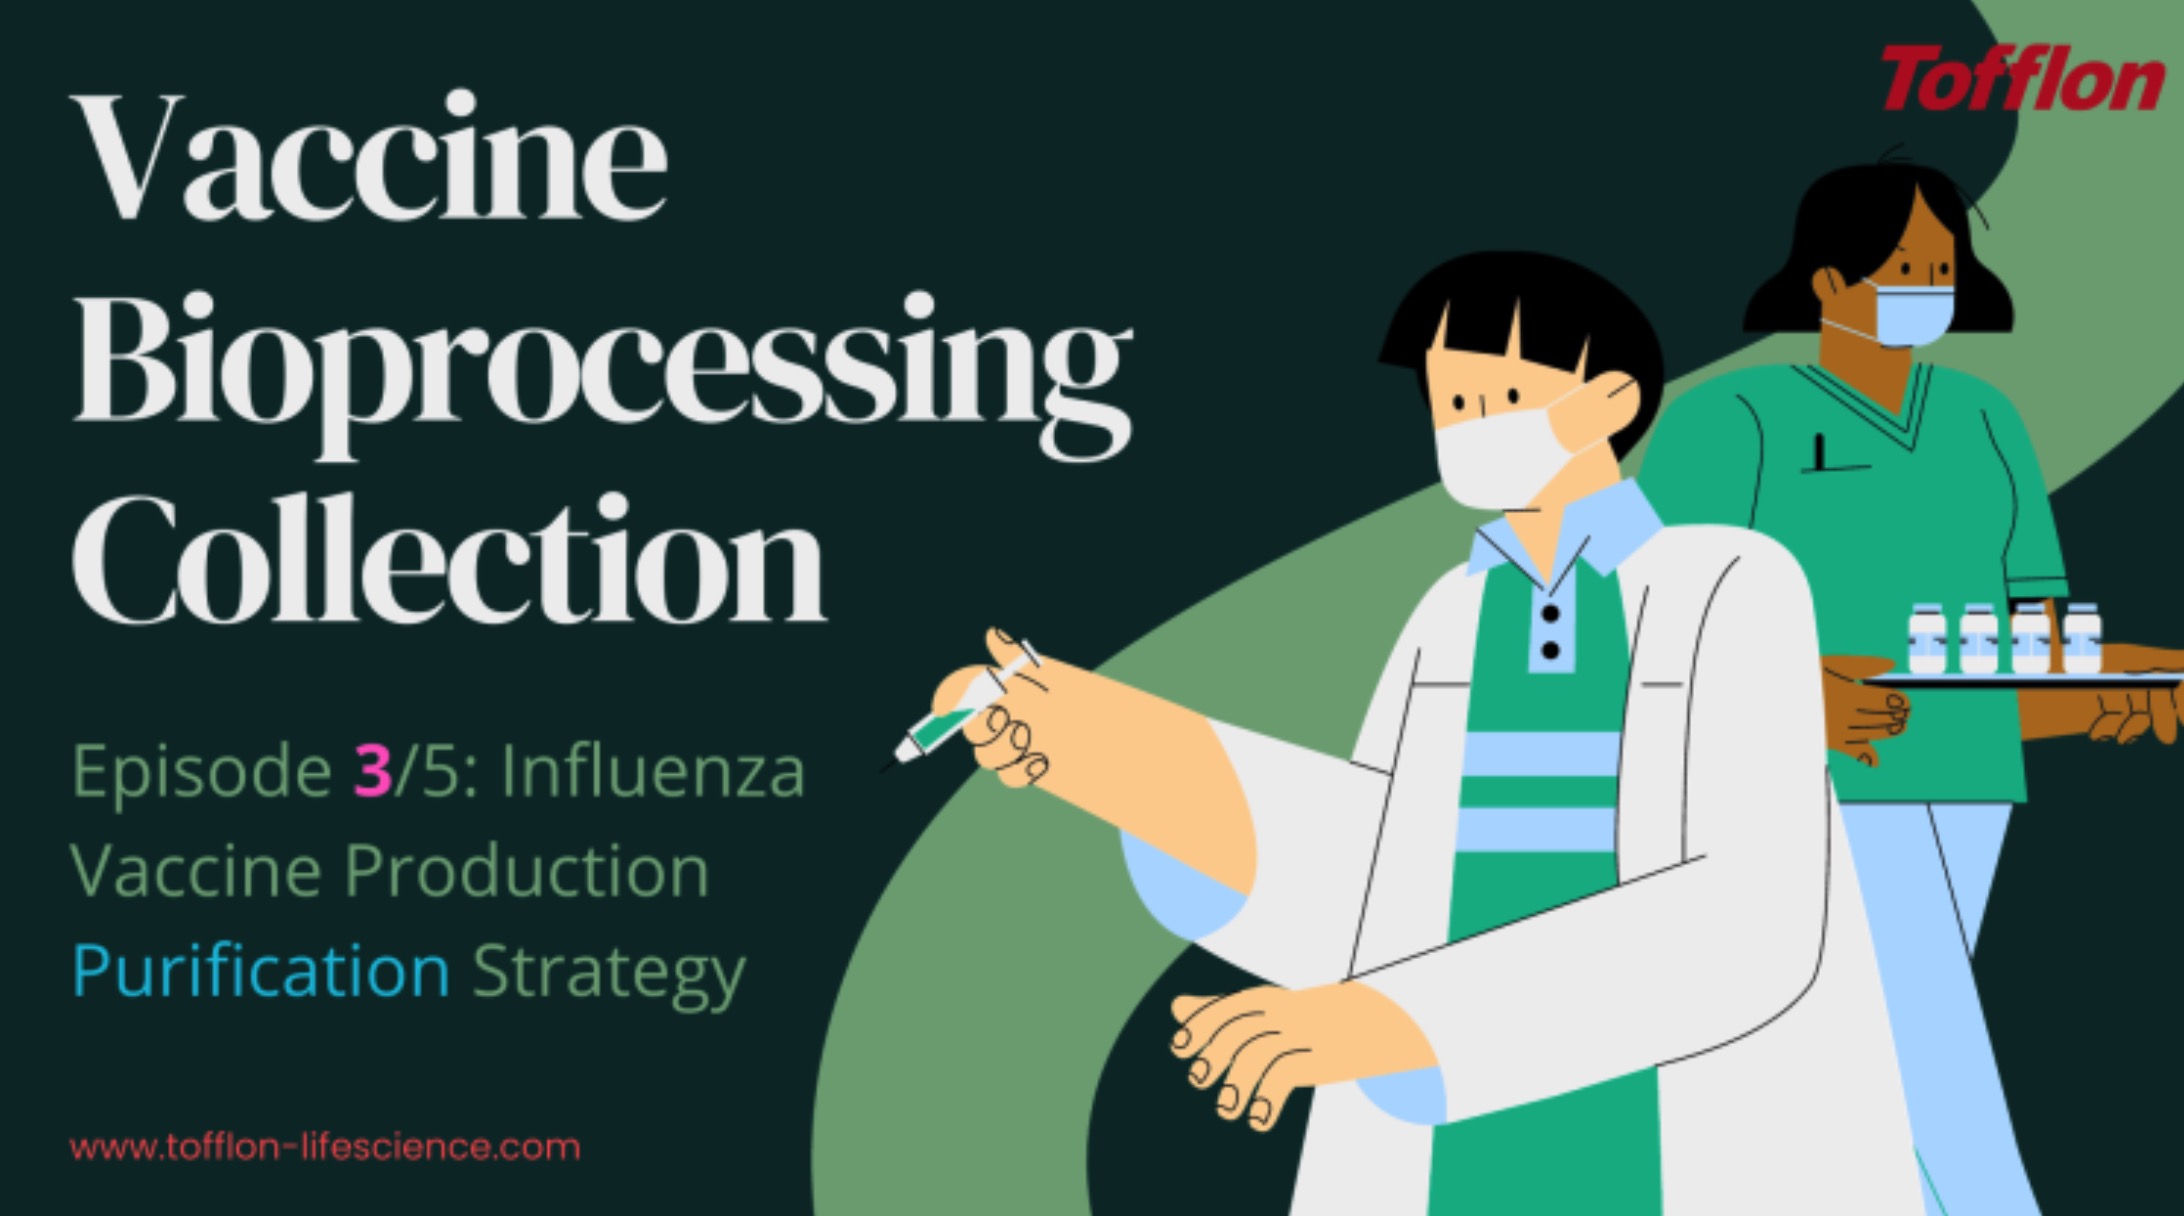 As a company focused on innovative bioprocessing technologies, we provide an in-depth look at the complex production workflow for influenza vaccines.